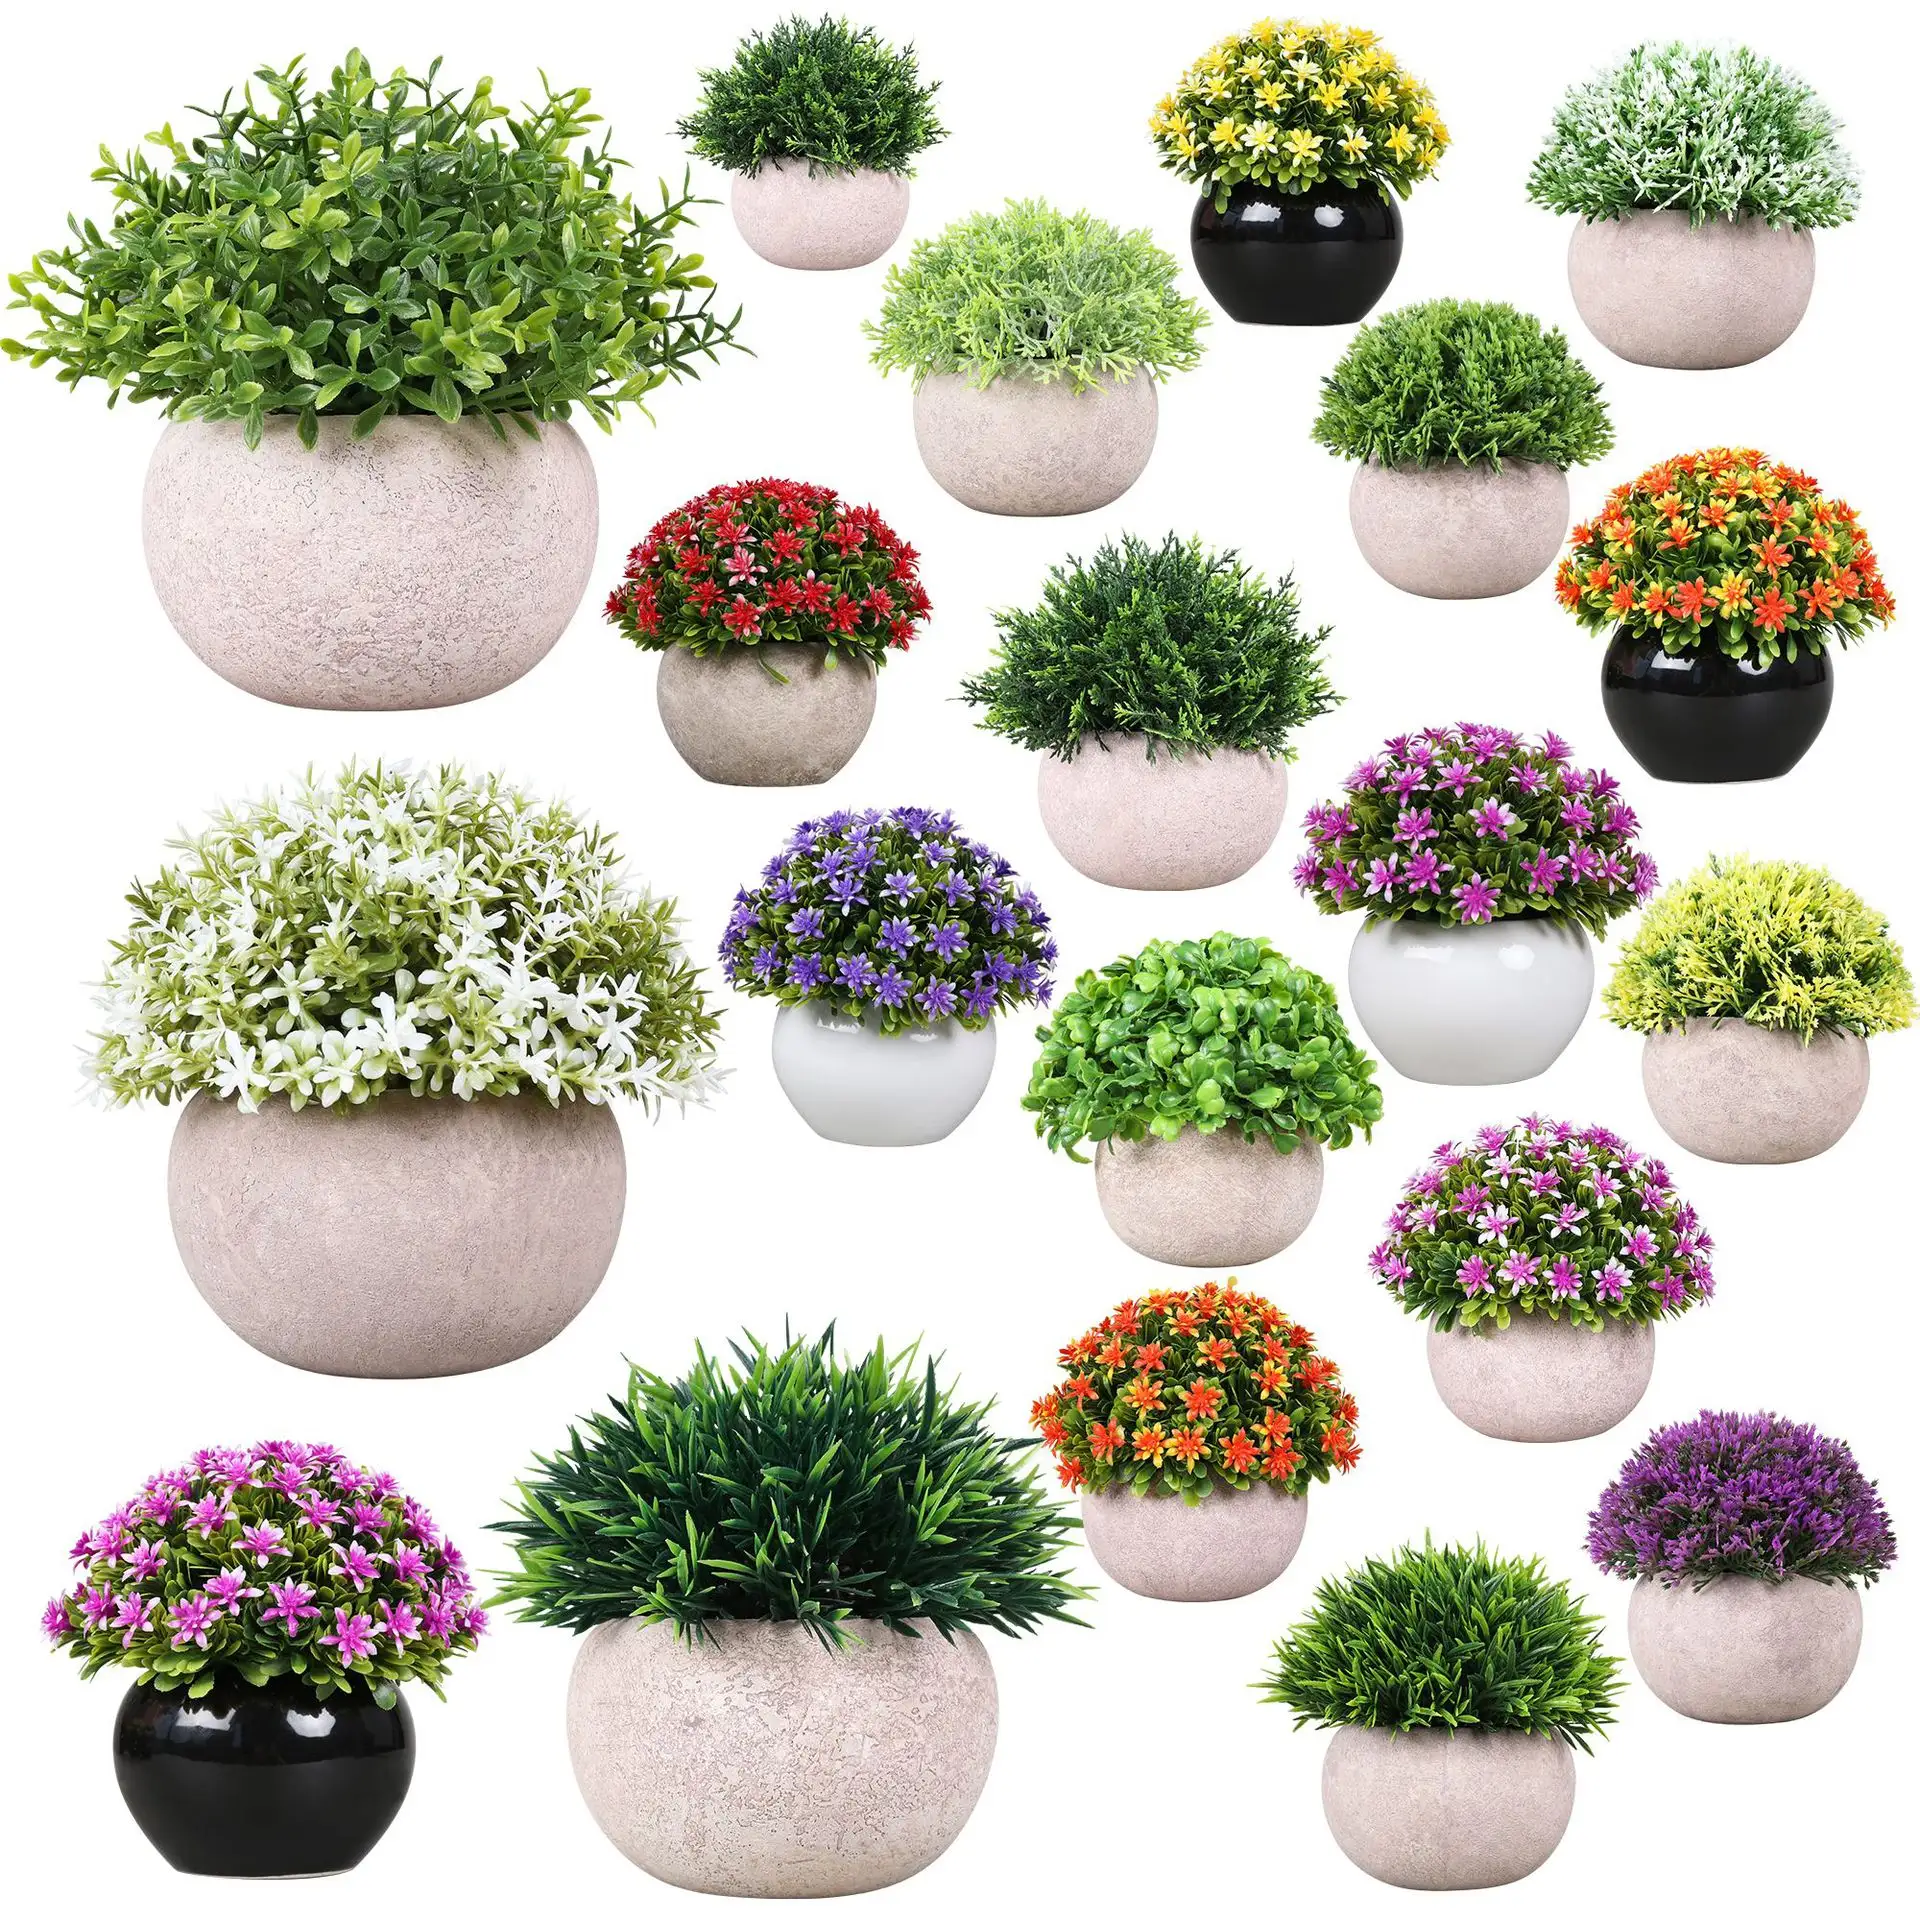 Hot Selling Artificial Succulents Plants Mini Artificial Potted Plants Small For Office Desk Decoration